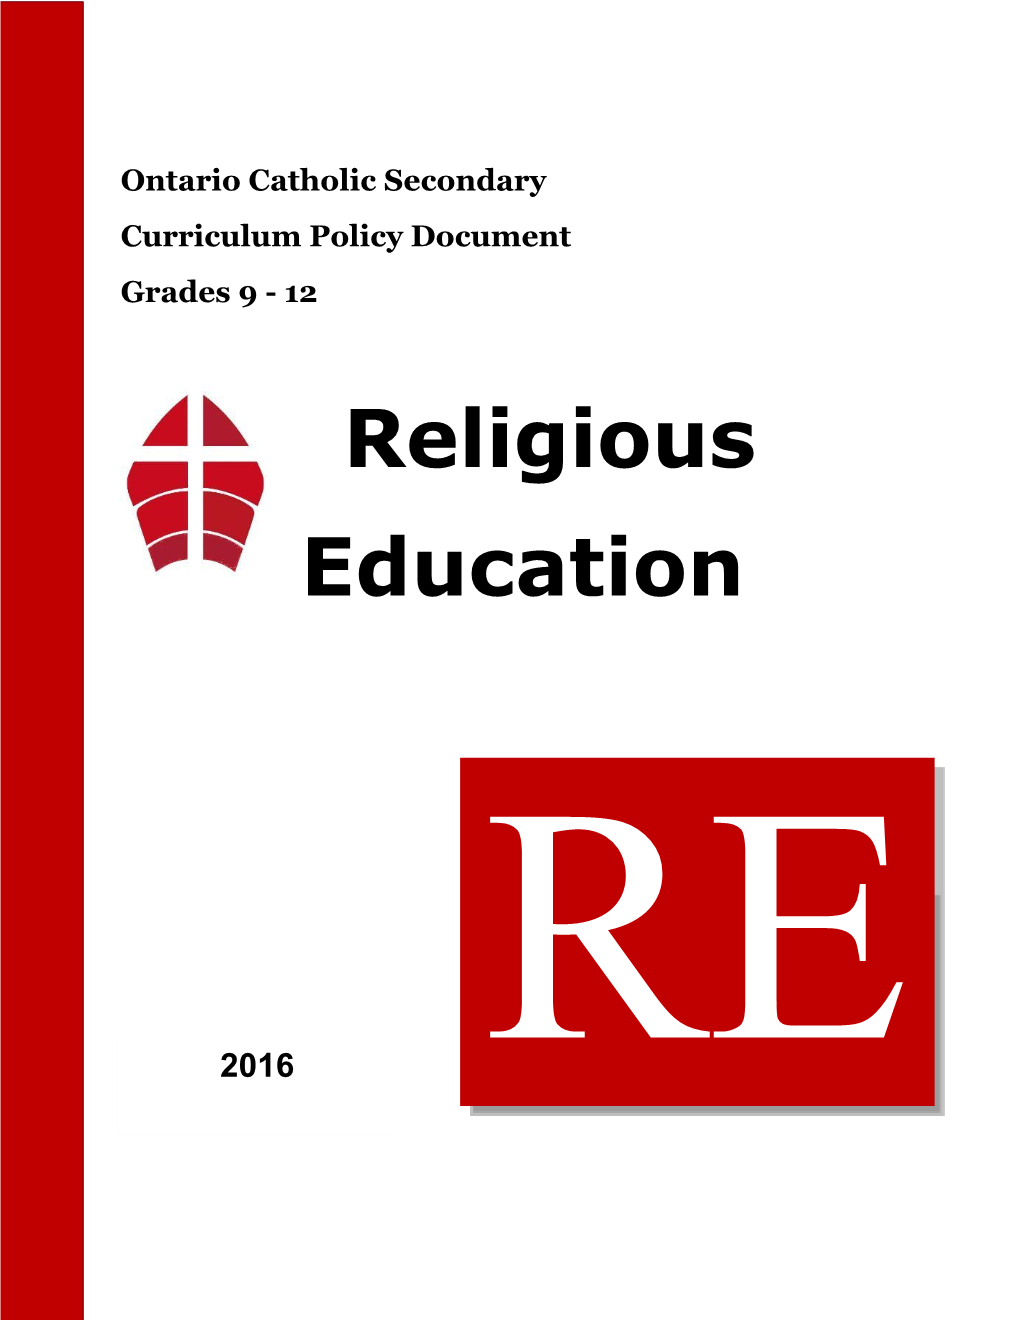 Secondary Religious Education Curriculum Policy Document 2016